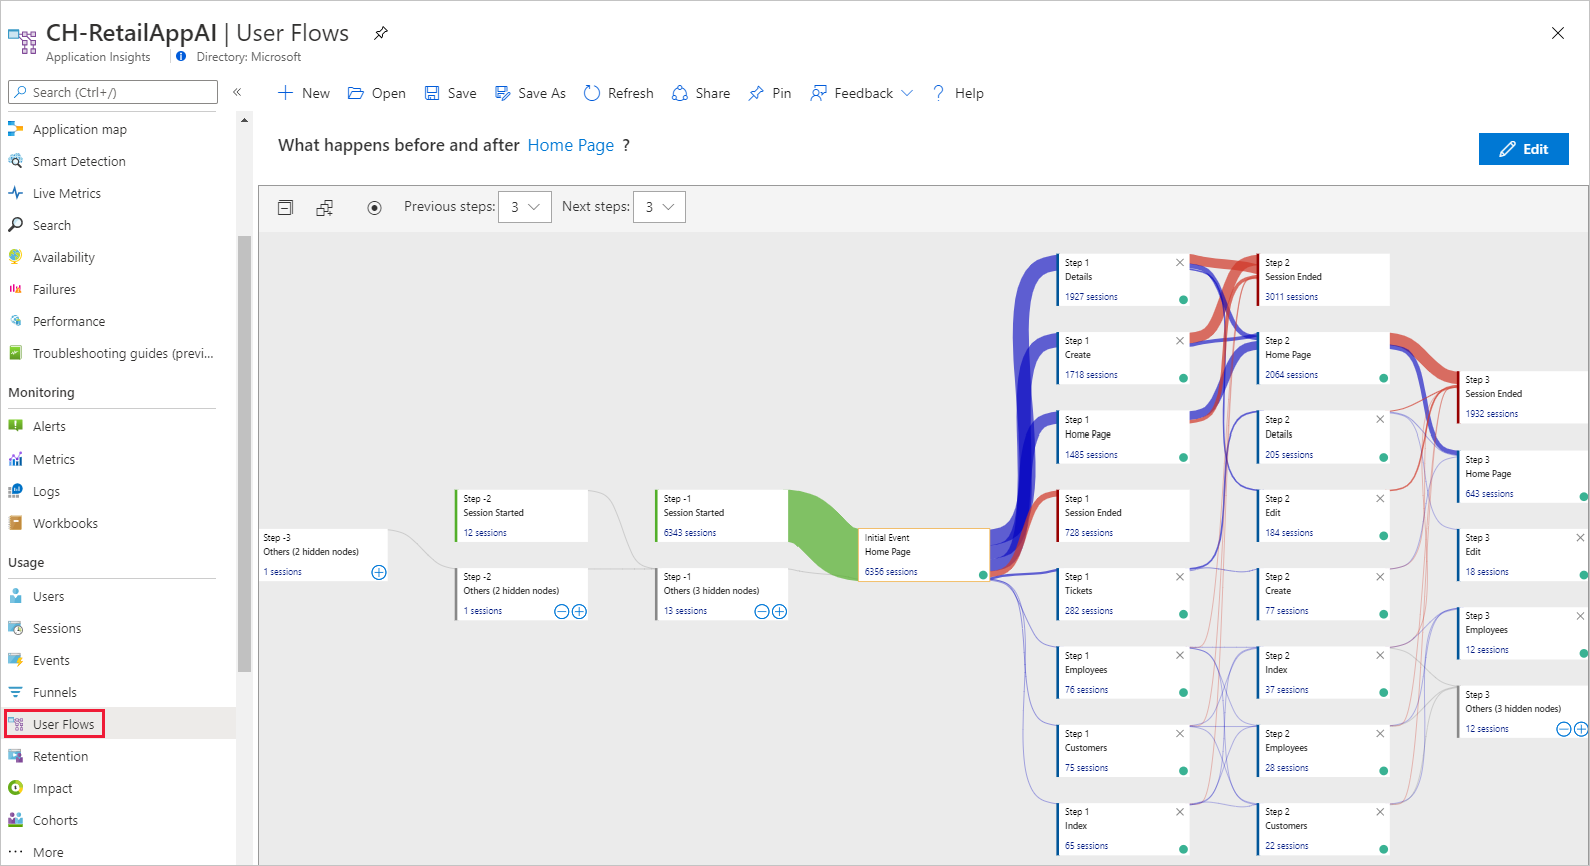 Screenshot that shows the Application Insights User Flows tool.